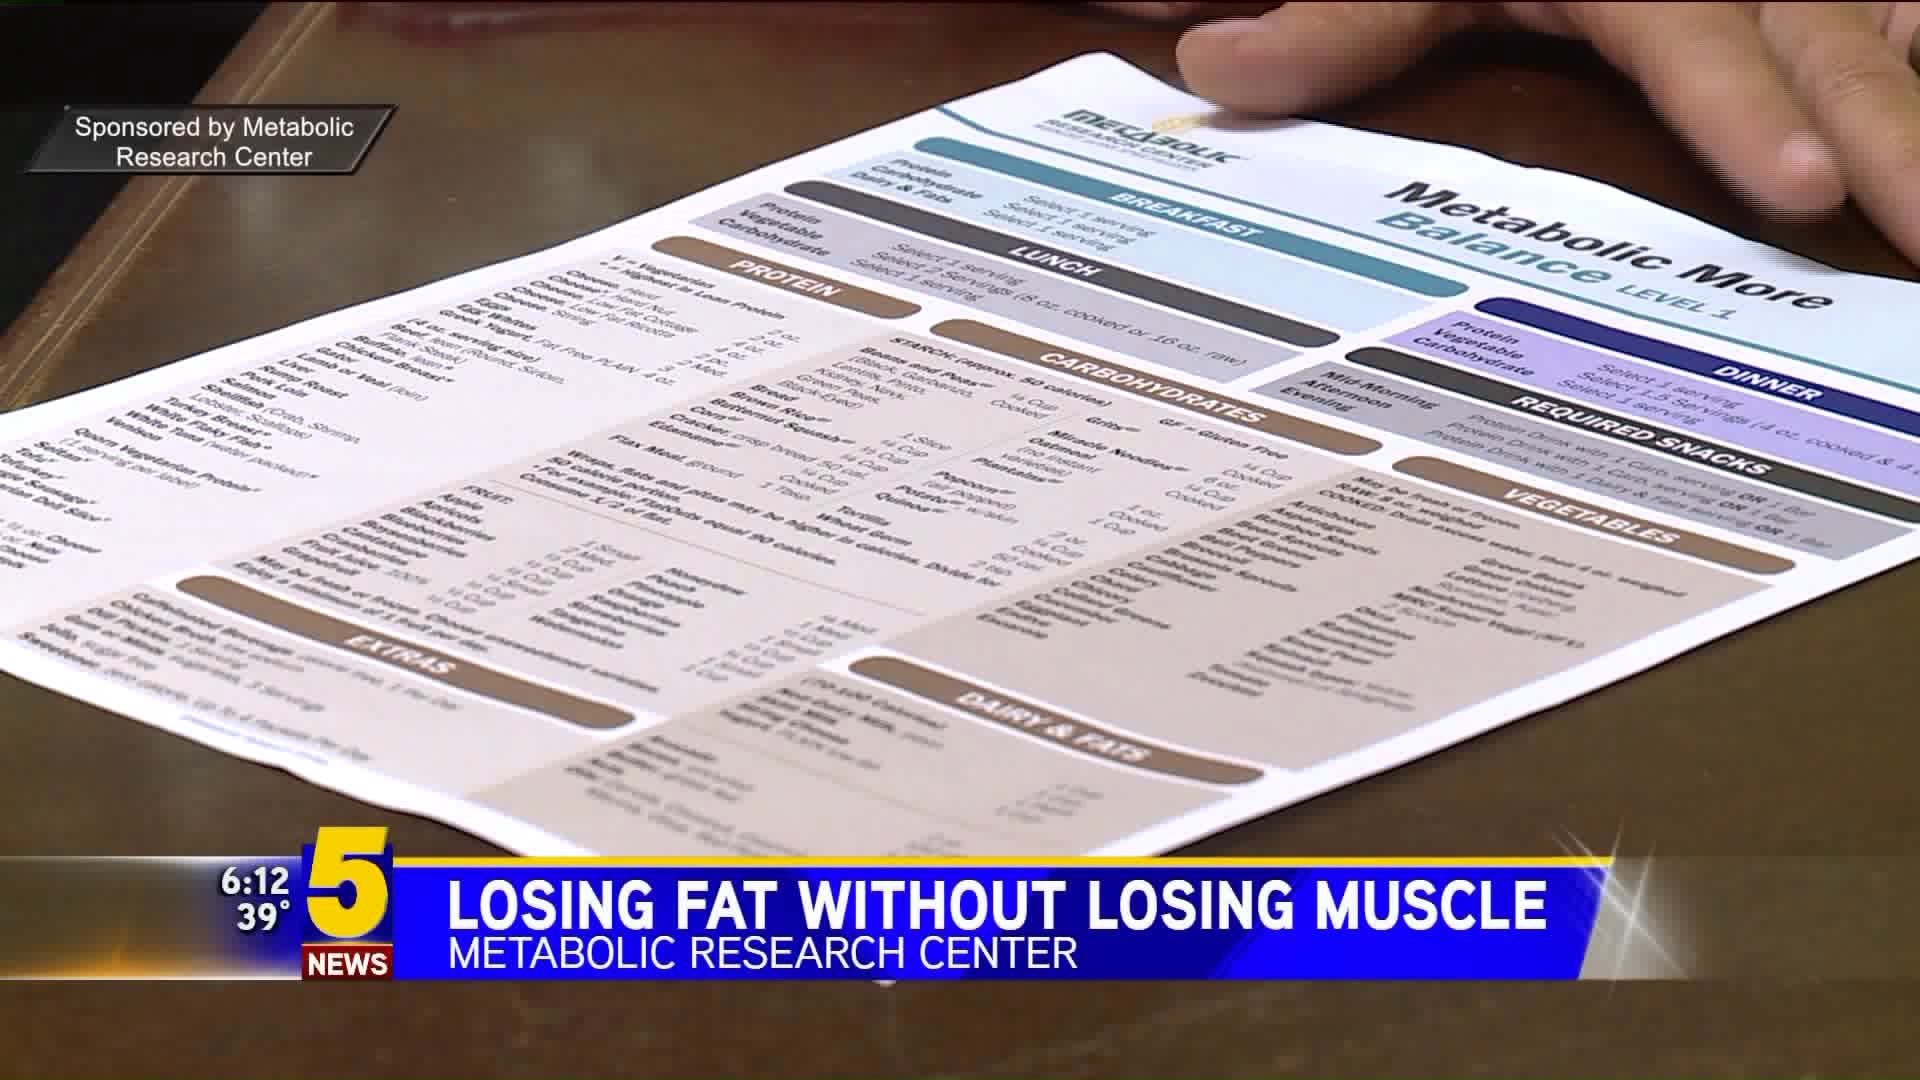 Metabolic Research Center - Losing Weight Without Losing Muscule - Phase 24